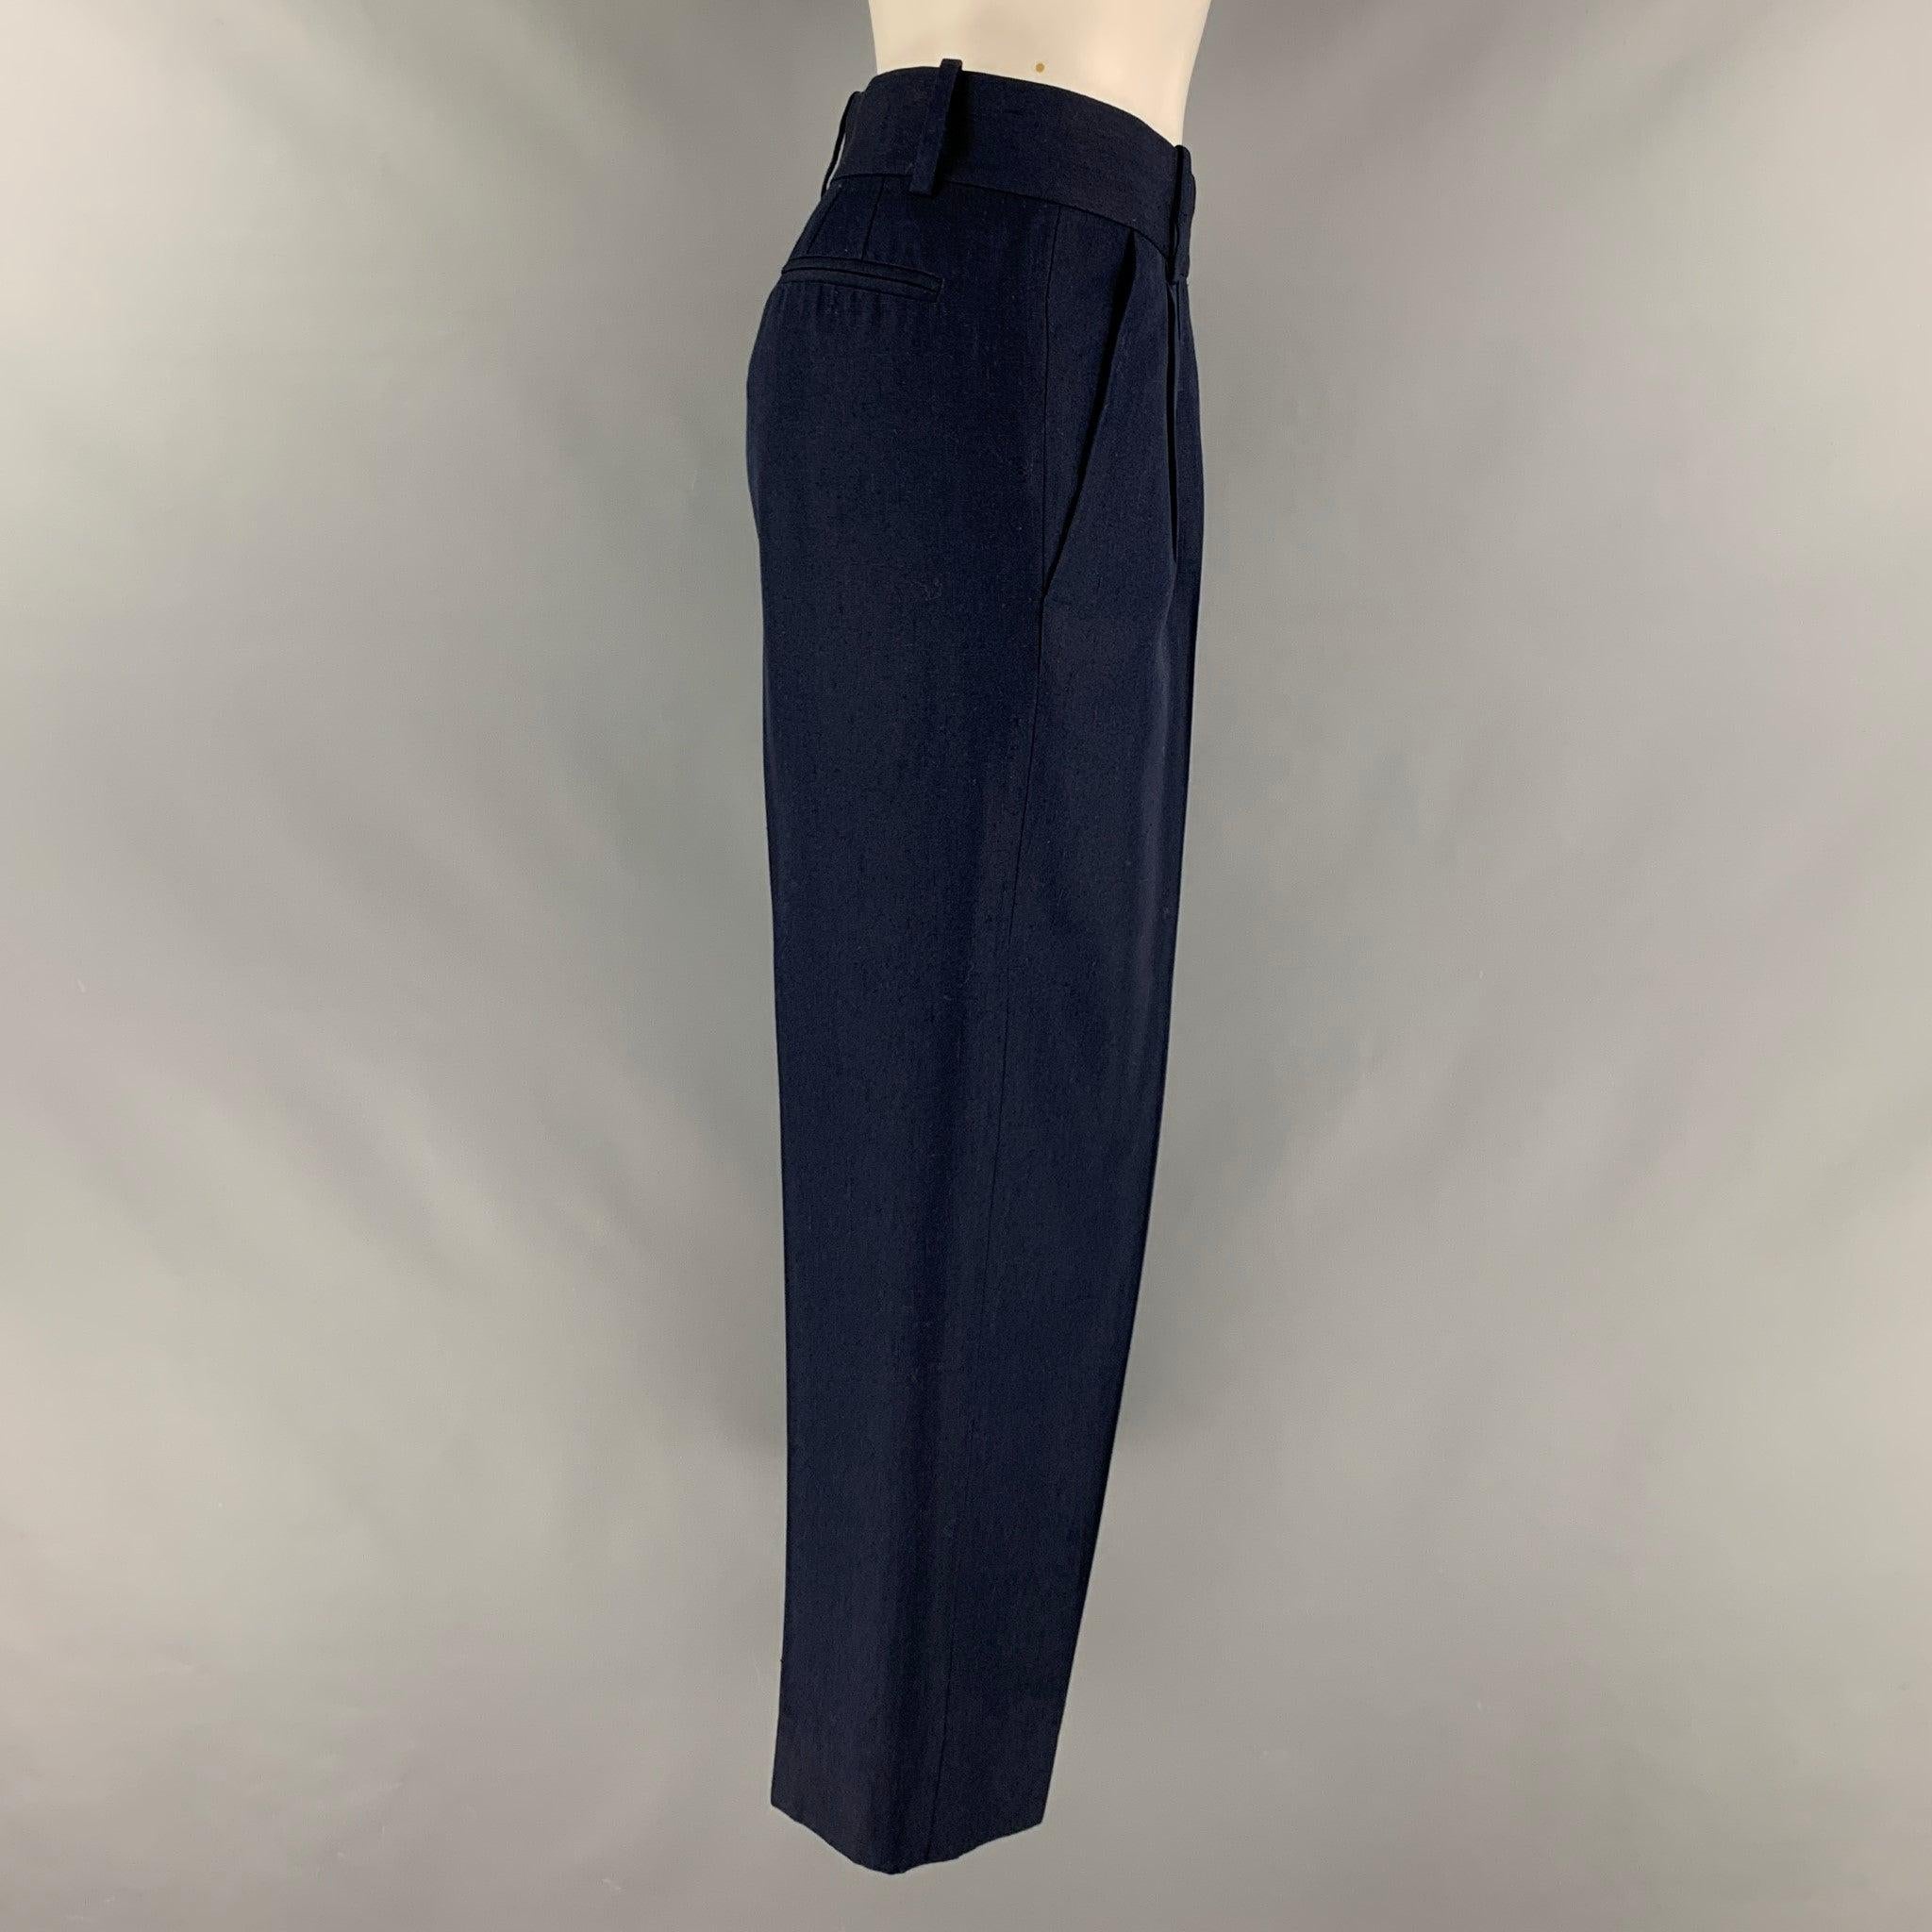 MARC JACOBS dress pants comes in a navy silk woven material featuring a pleated front,
 front tab, and a zip fly closure. Made in USA.Good Pre-Owned Condition. AS IS 

Marked:  8 

Measurements: 
 Waist: 34 inches Rise: 10 inches Inseam: 24 inches 
